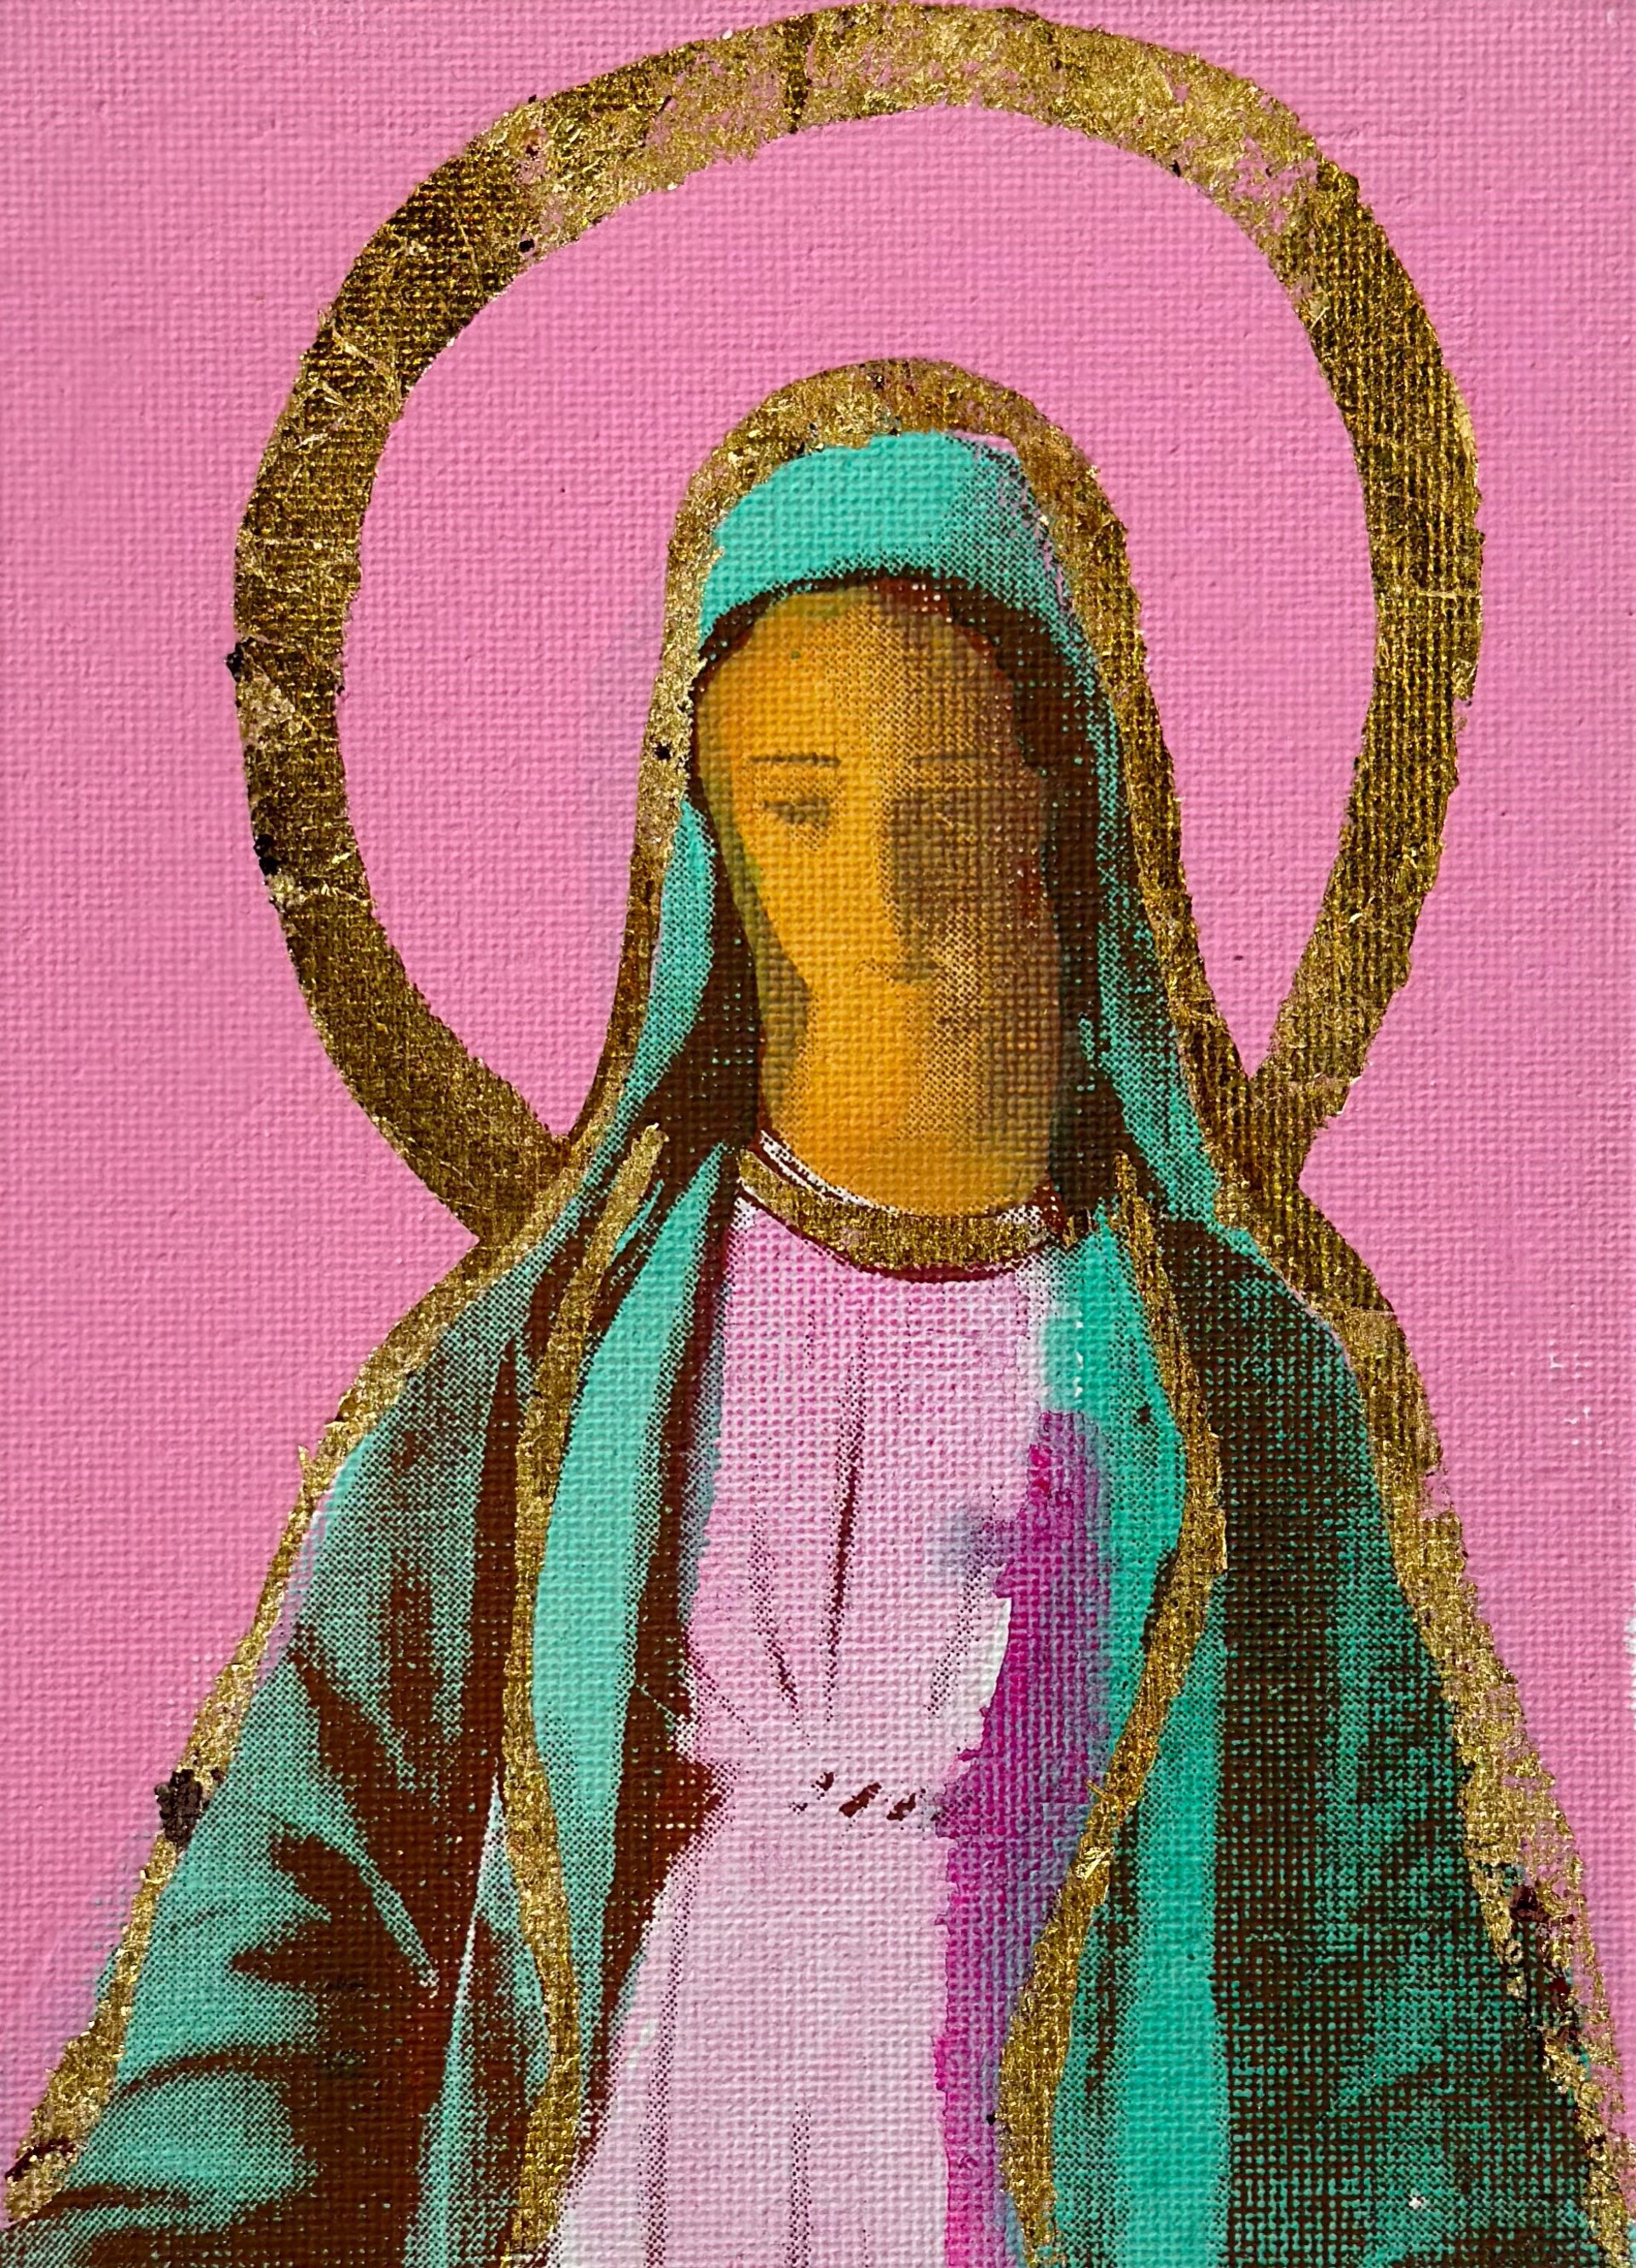 Hail Mary 10 by Megan Coonelly